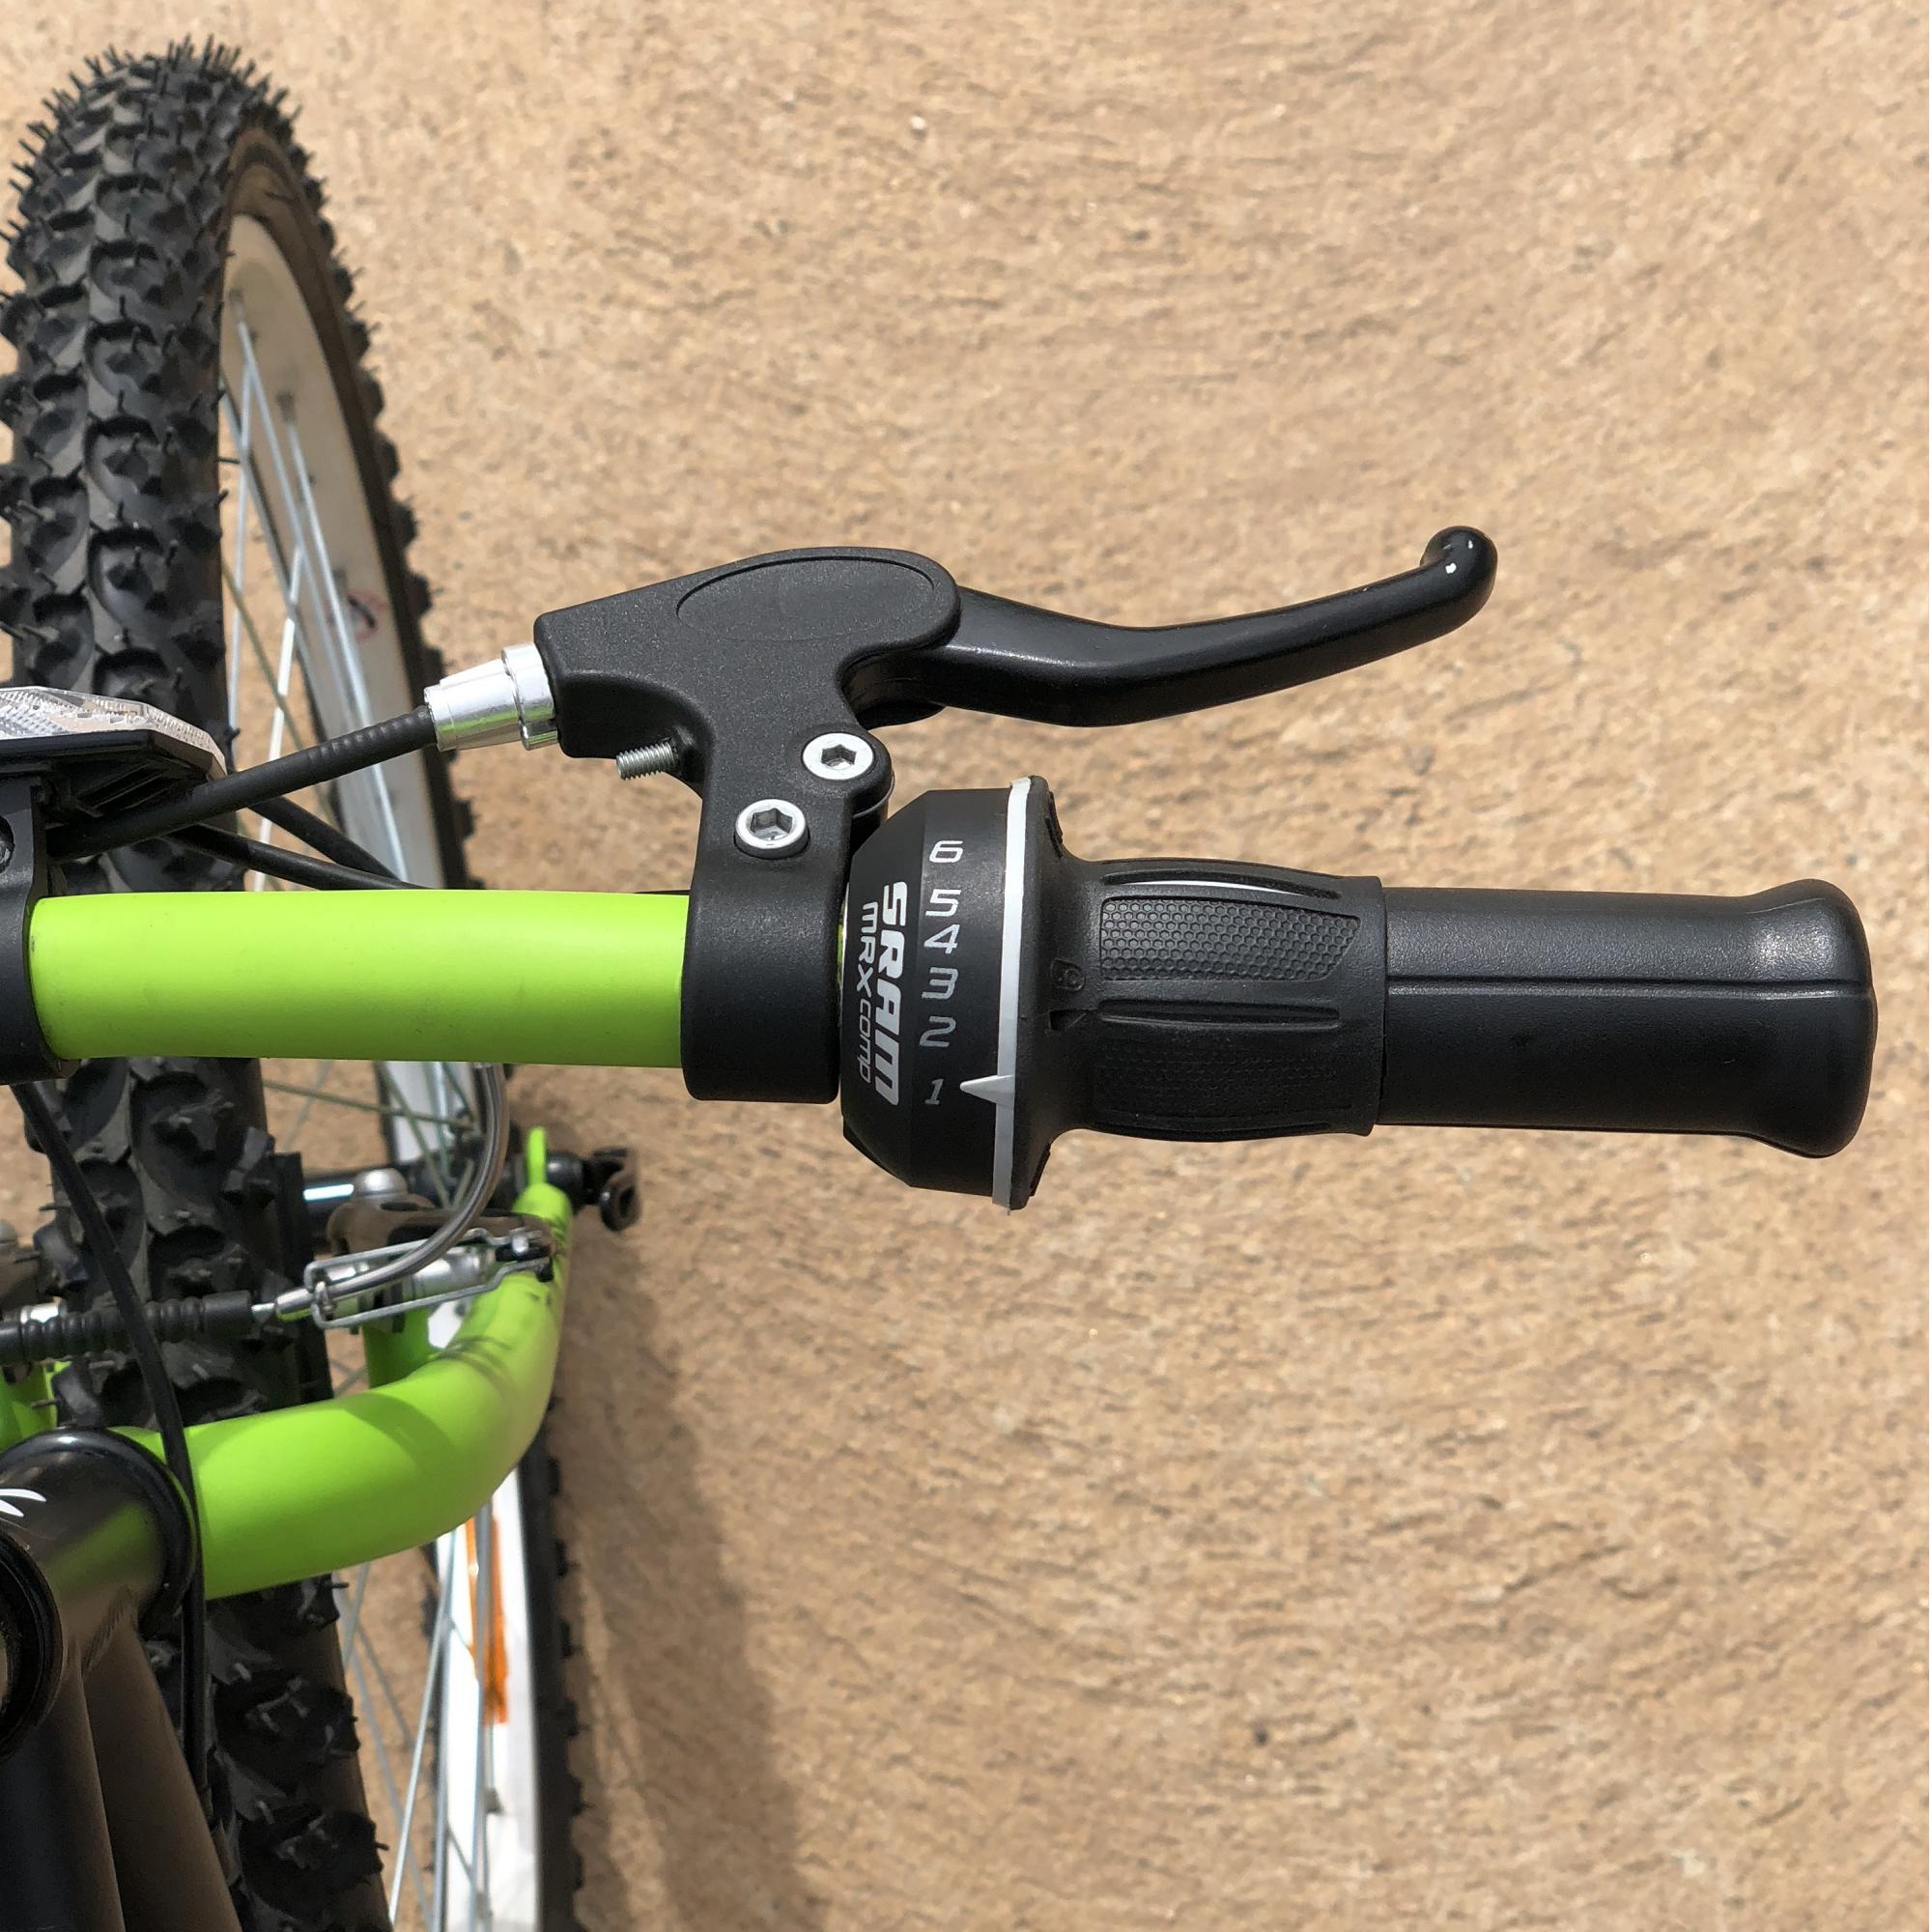 btwin rockrider 300 review